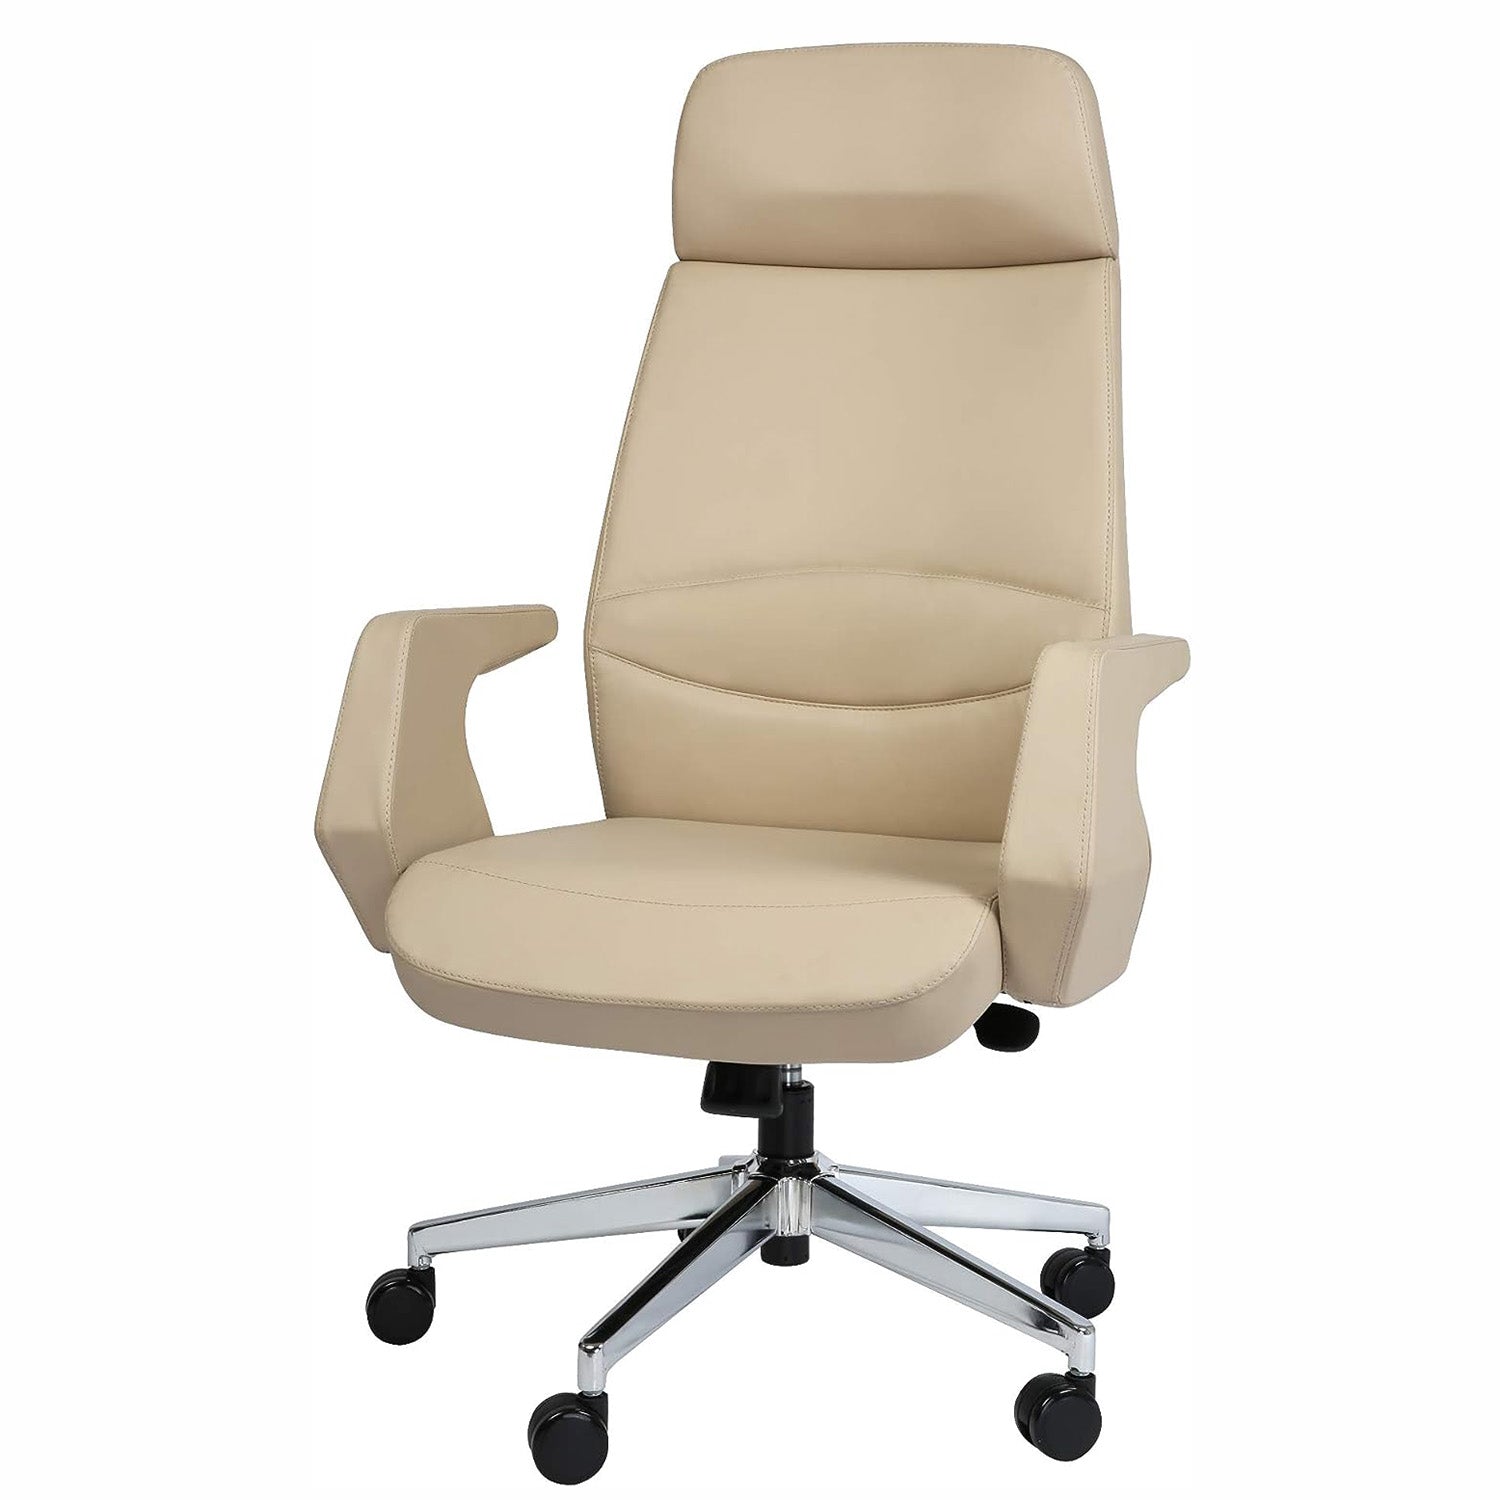 Executive Office Chair Ergonomic Leather High Back Chair with Padded Armrests Lumbar Support